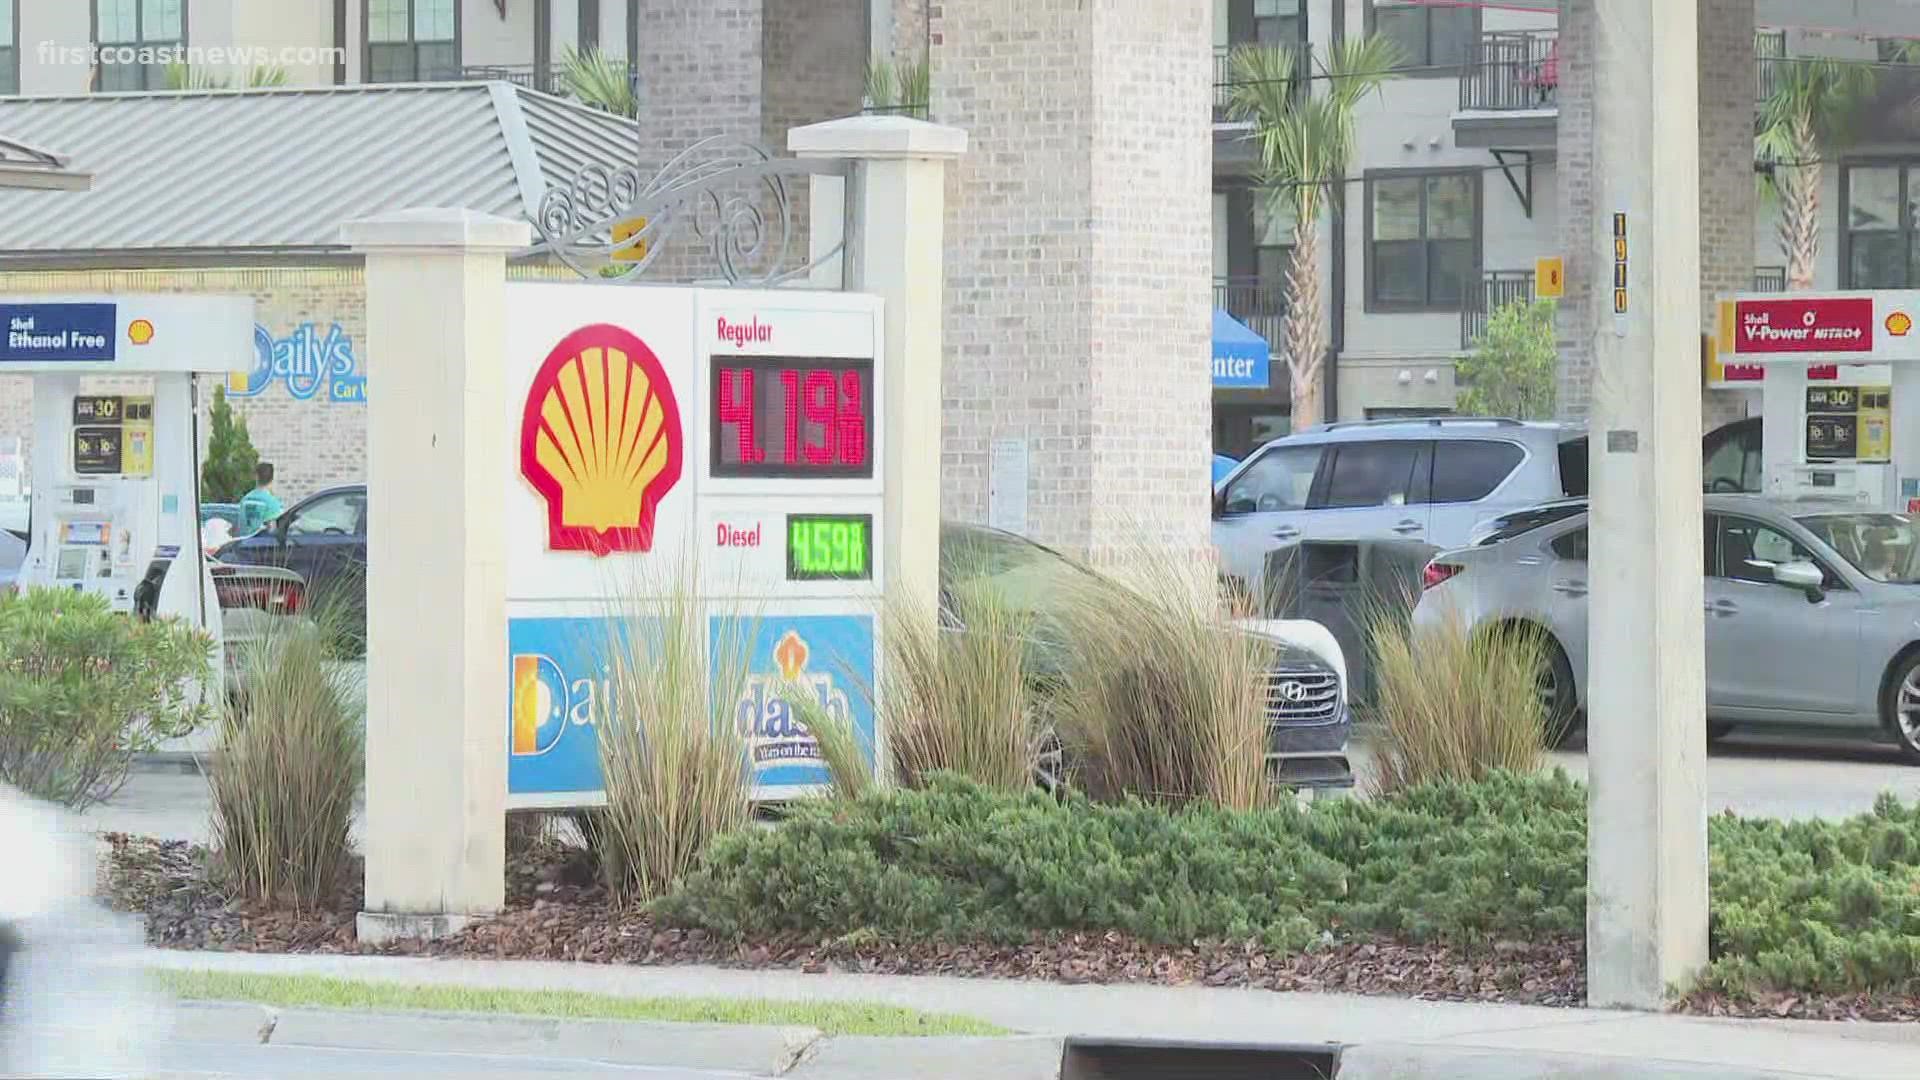 The jump comes as fuel costs skyrocket across the nation.